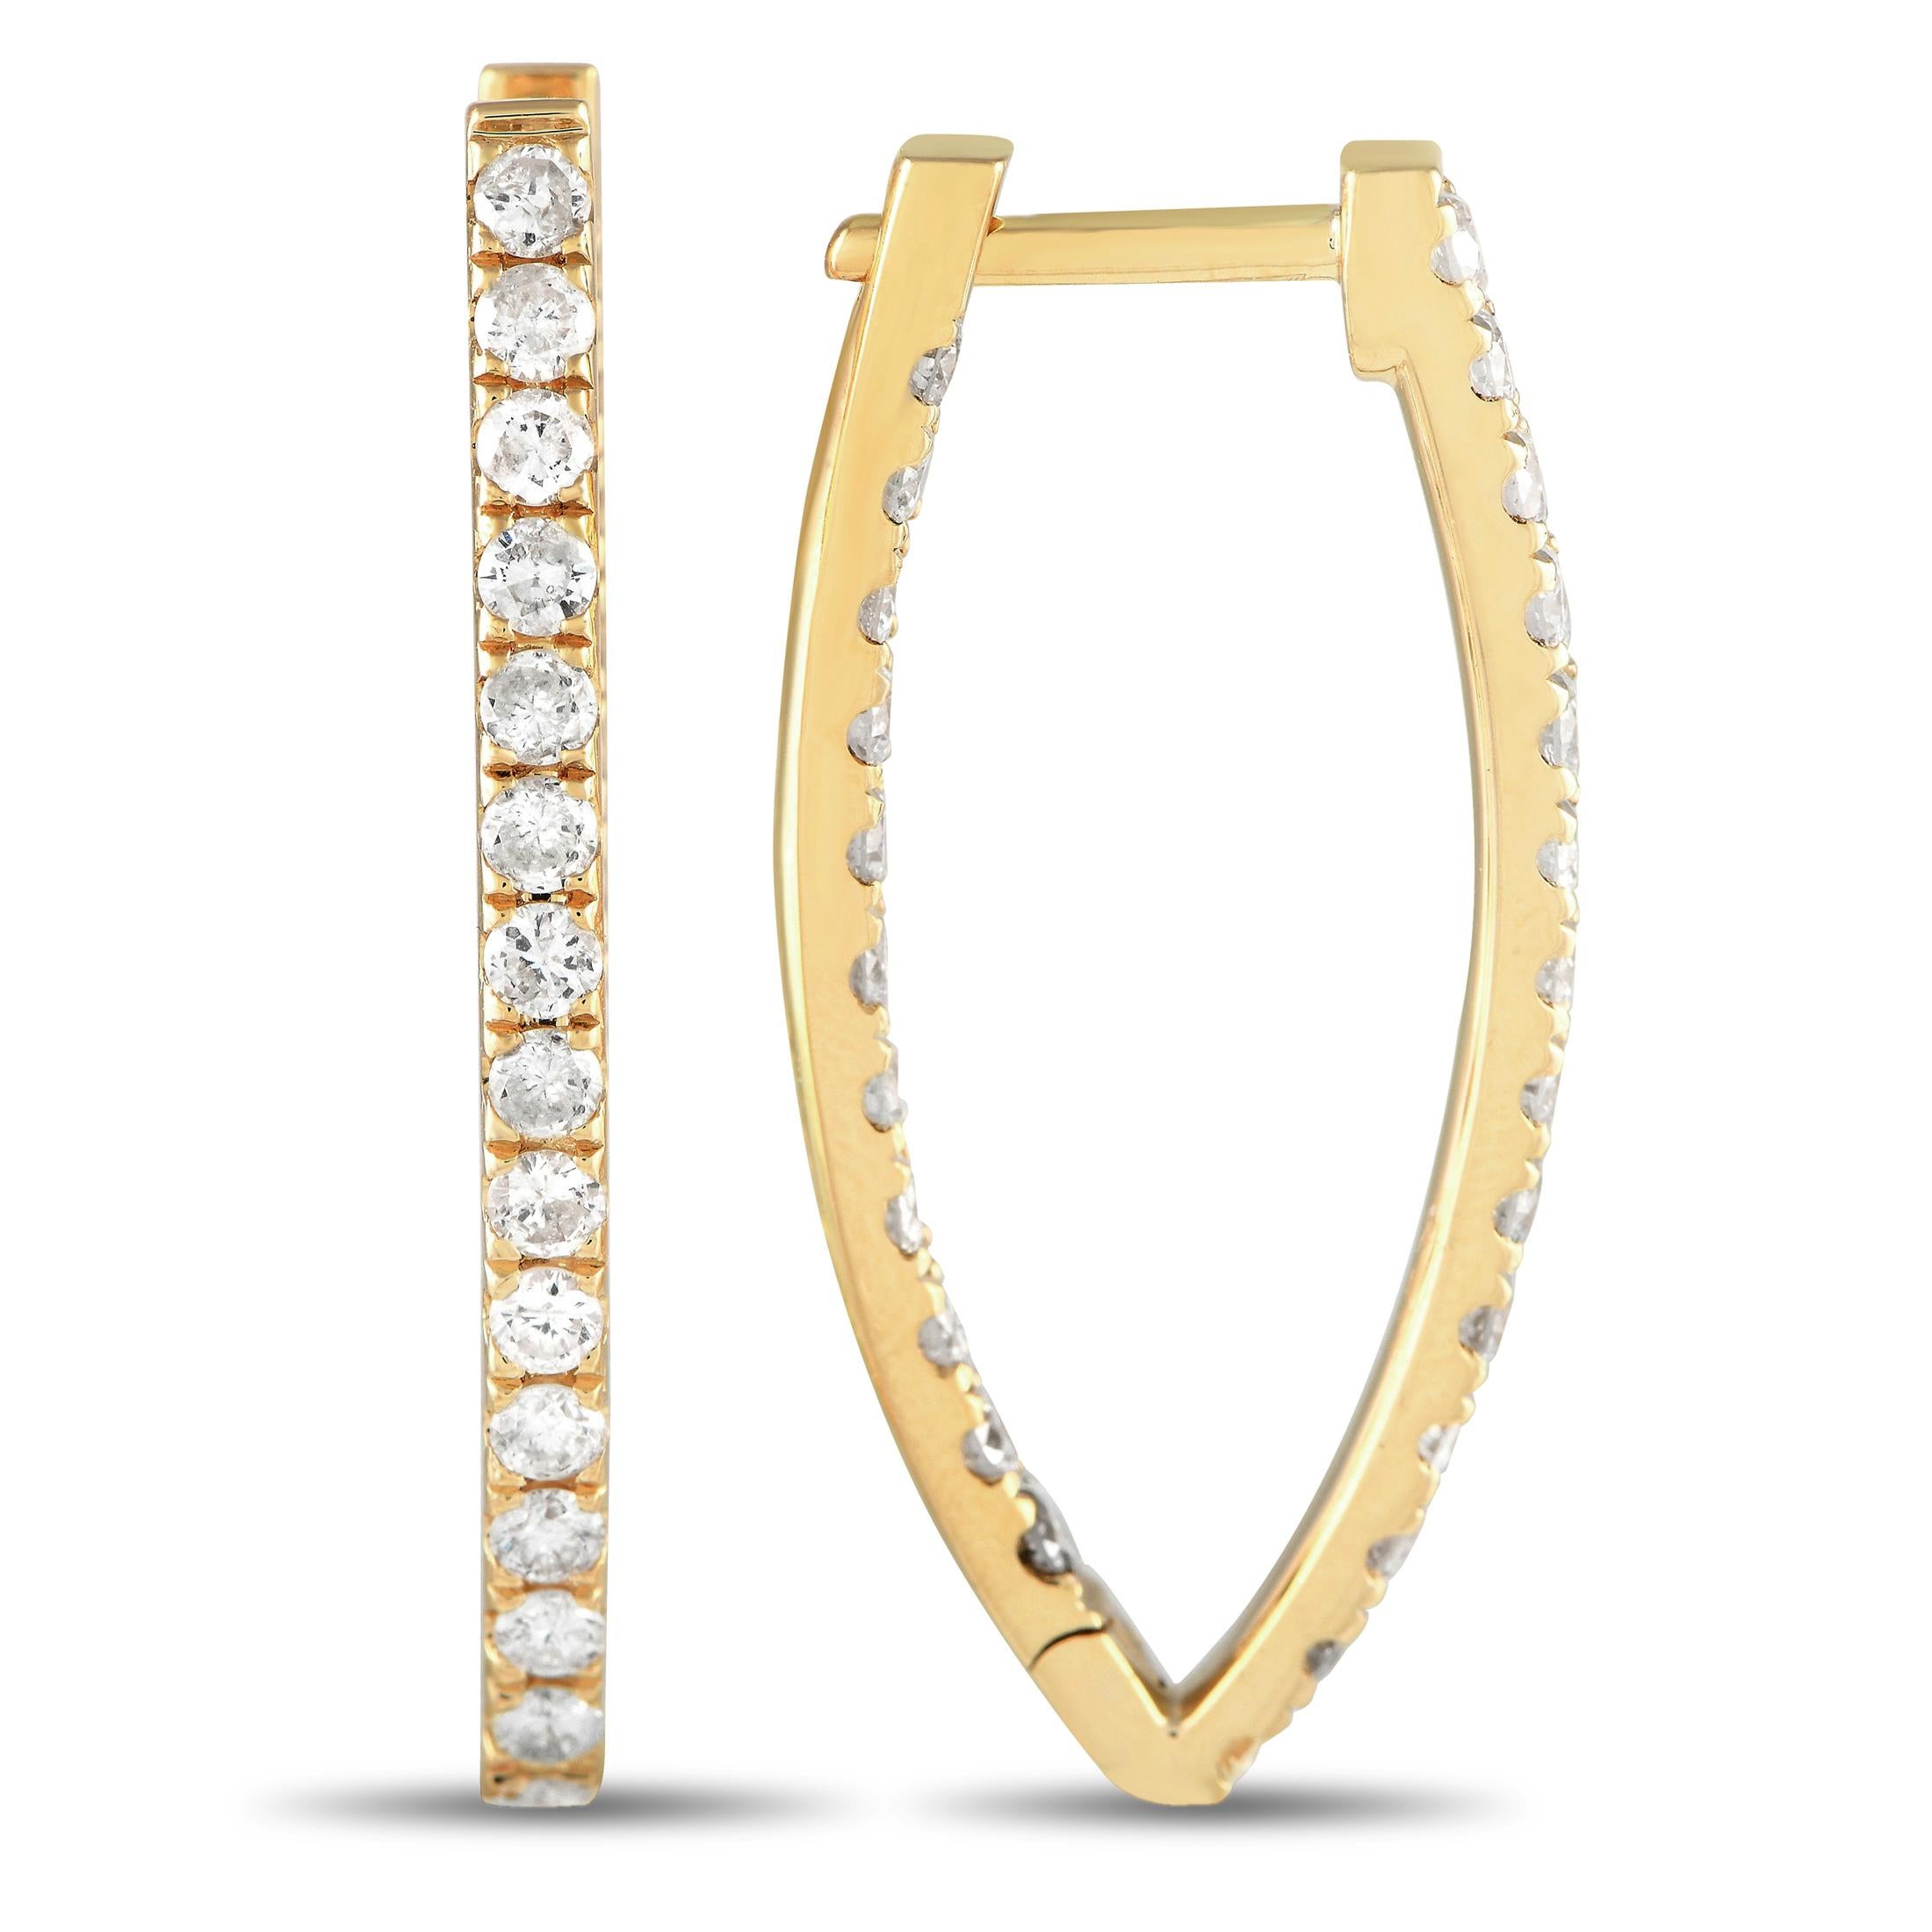 Add sparkle to any ensemble by adding these sophisticated earrings. Each one features a sleek, simple 14K yellow gold setting that measures 1.25 long by 0.60 wide. Diamonds with a total weight of 1.78 carats make them impossible to ignore.This